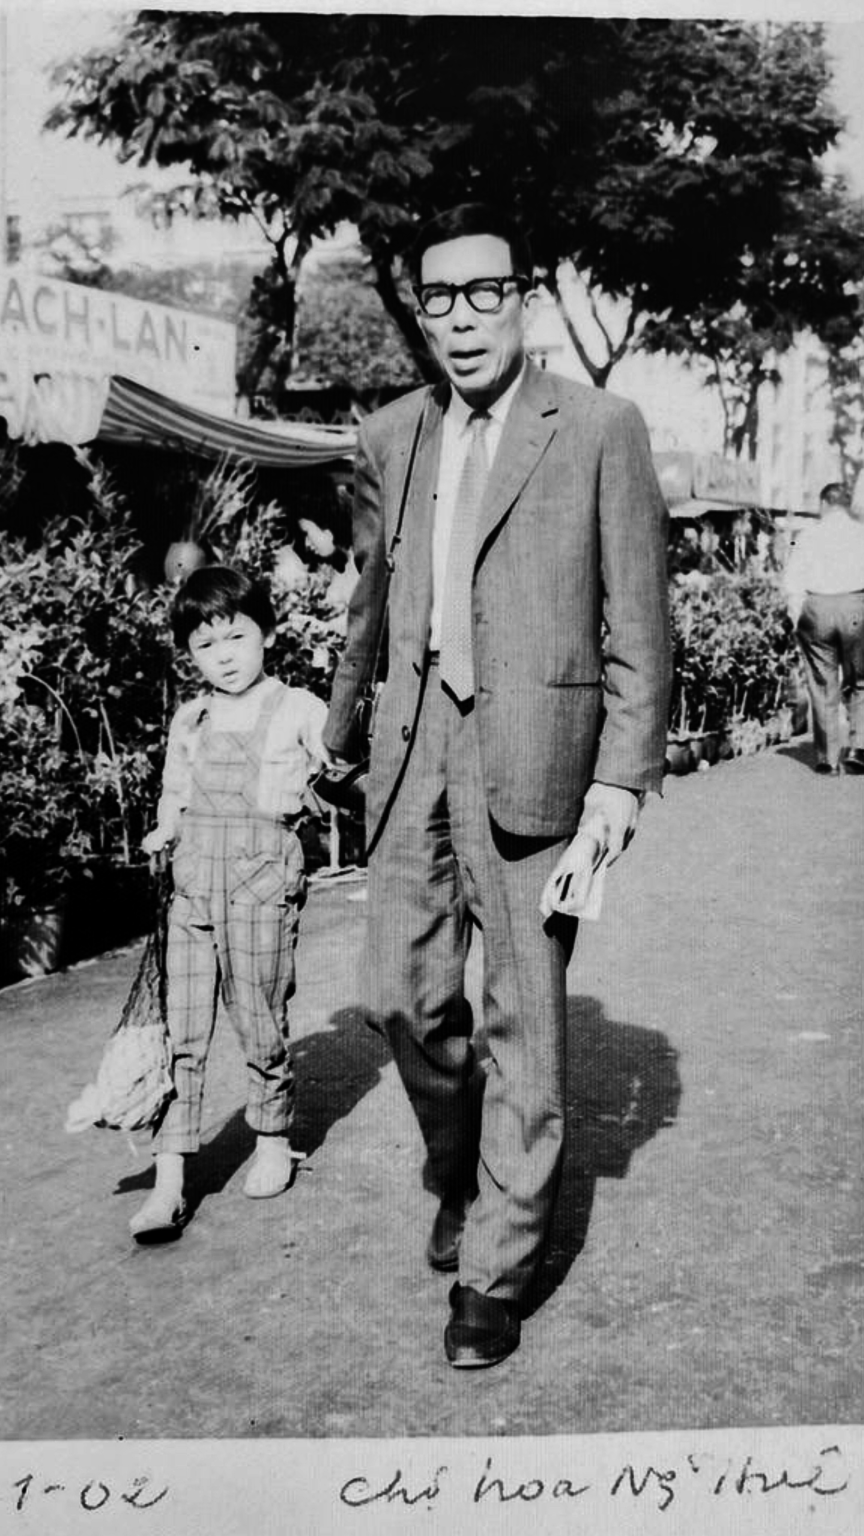 Mai Trung Thu (Vietnamese, 1906-1980) and Ngo Manh Duc (B. 1941) - Son of Le Thi Luu (Vietnamese, 1911-1988) and Ngo The Tan. Photograph gifted to Mr Jean-François Hubert (Christie's Senior Consultant, Vietnamese Art) by Mr Ngo Manh Duc on the occasion of The Ngo Manh Duc Collection or The Homage of a Son to His Mother at Christie's Hong Kong, 24 November 2019.